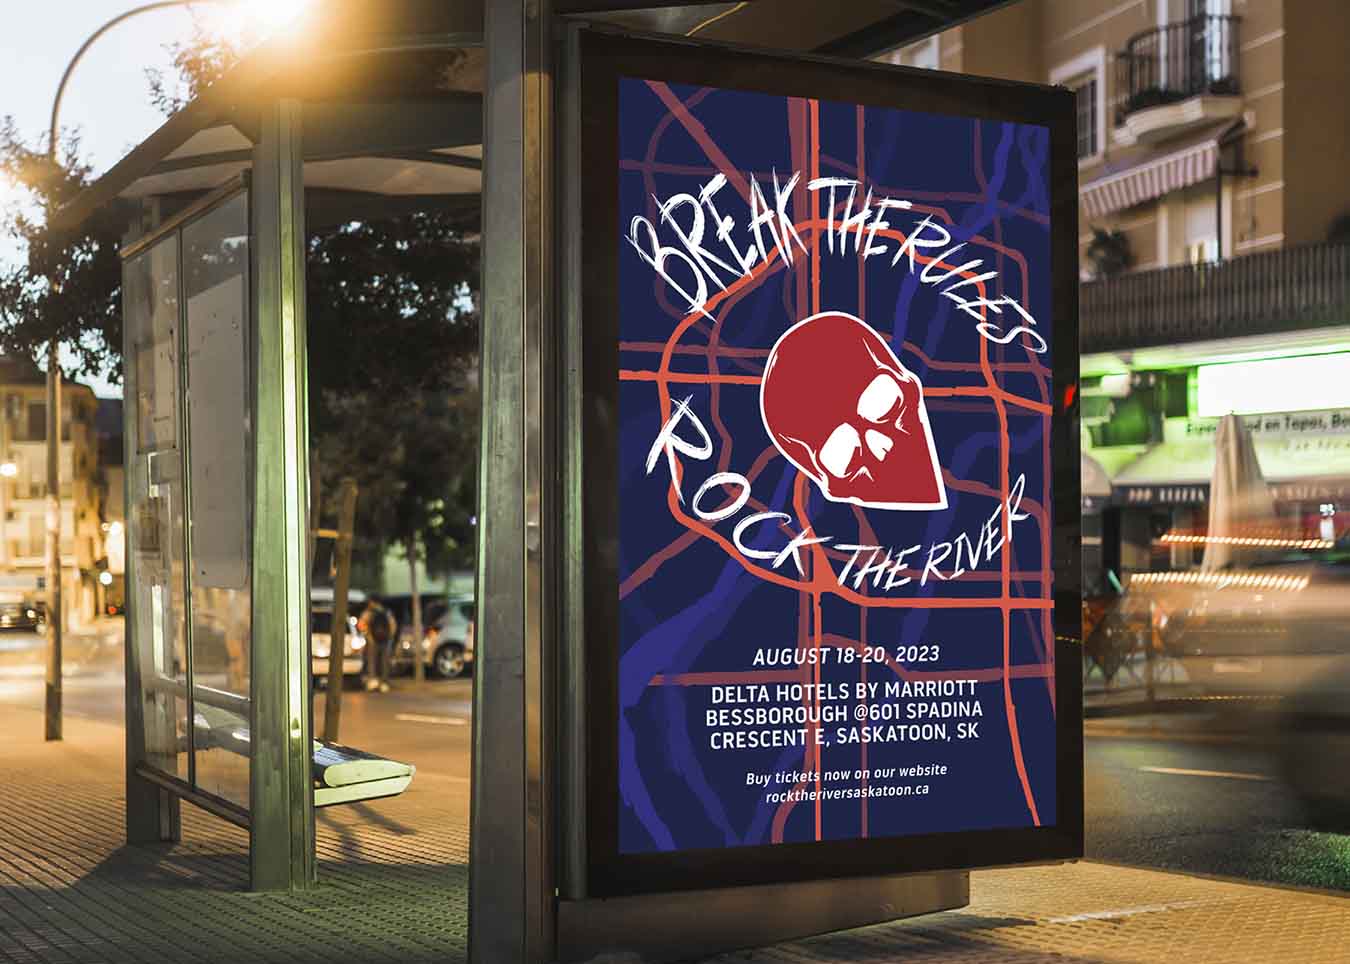 Large bus shelter ad featuring the event logo and a tag line, 'Break the rules, Rock the River'. Includes dates and times of the event and their website url prompting people to buy tickets